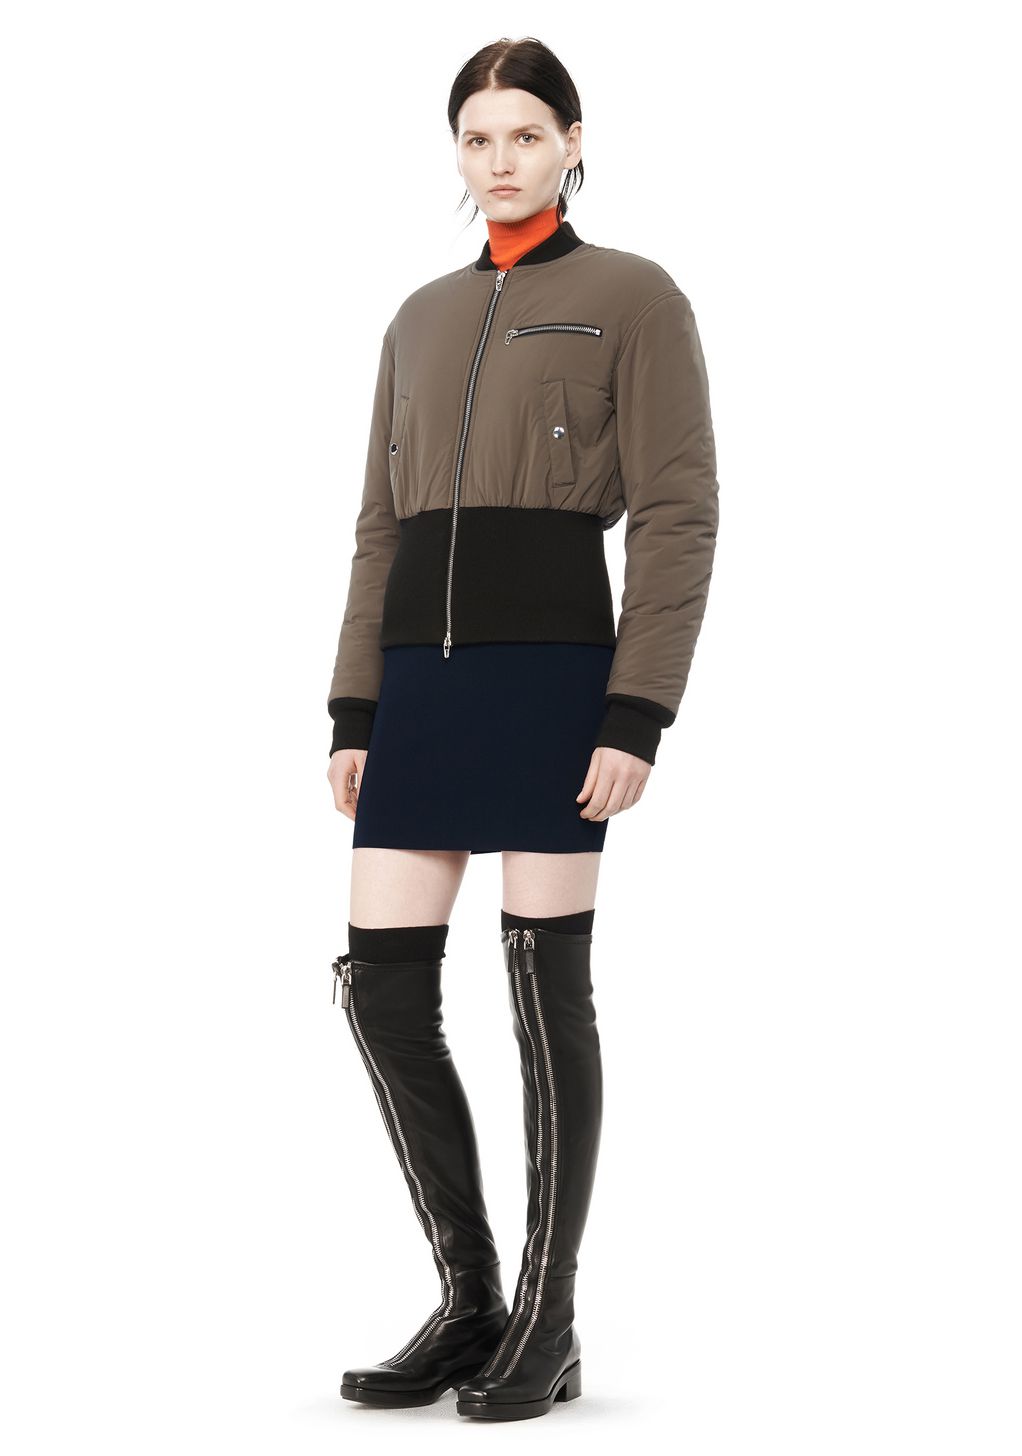 Alexander Wang ‎CROPPED PUFFER BOMBER ‎ ‎JACKETS AND OUTERWEAR